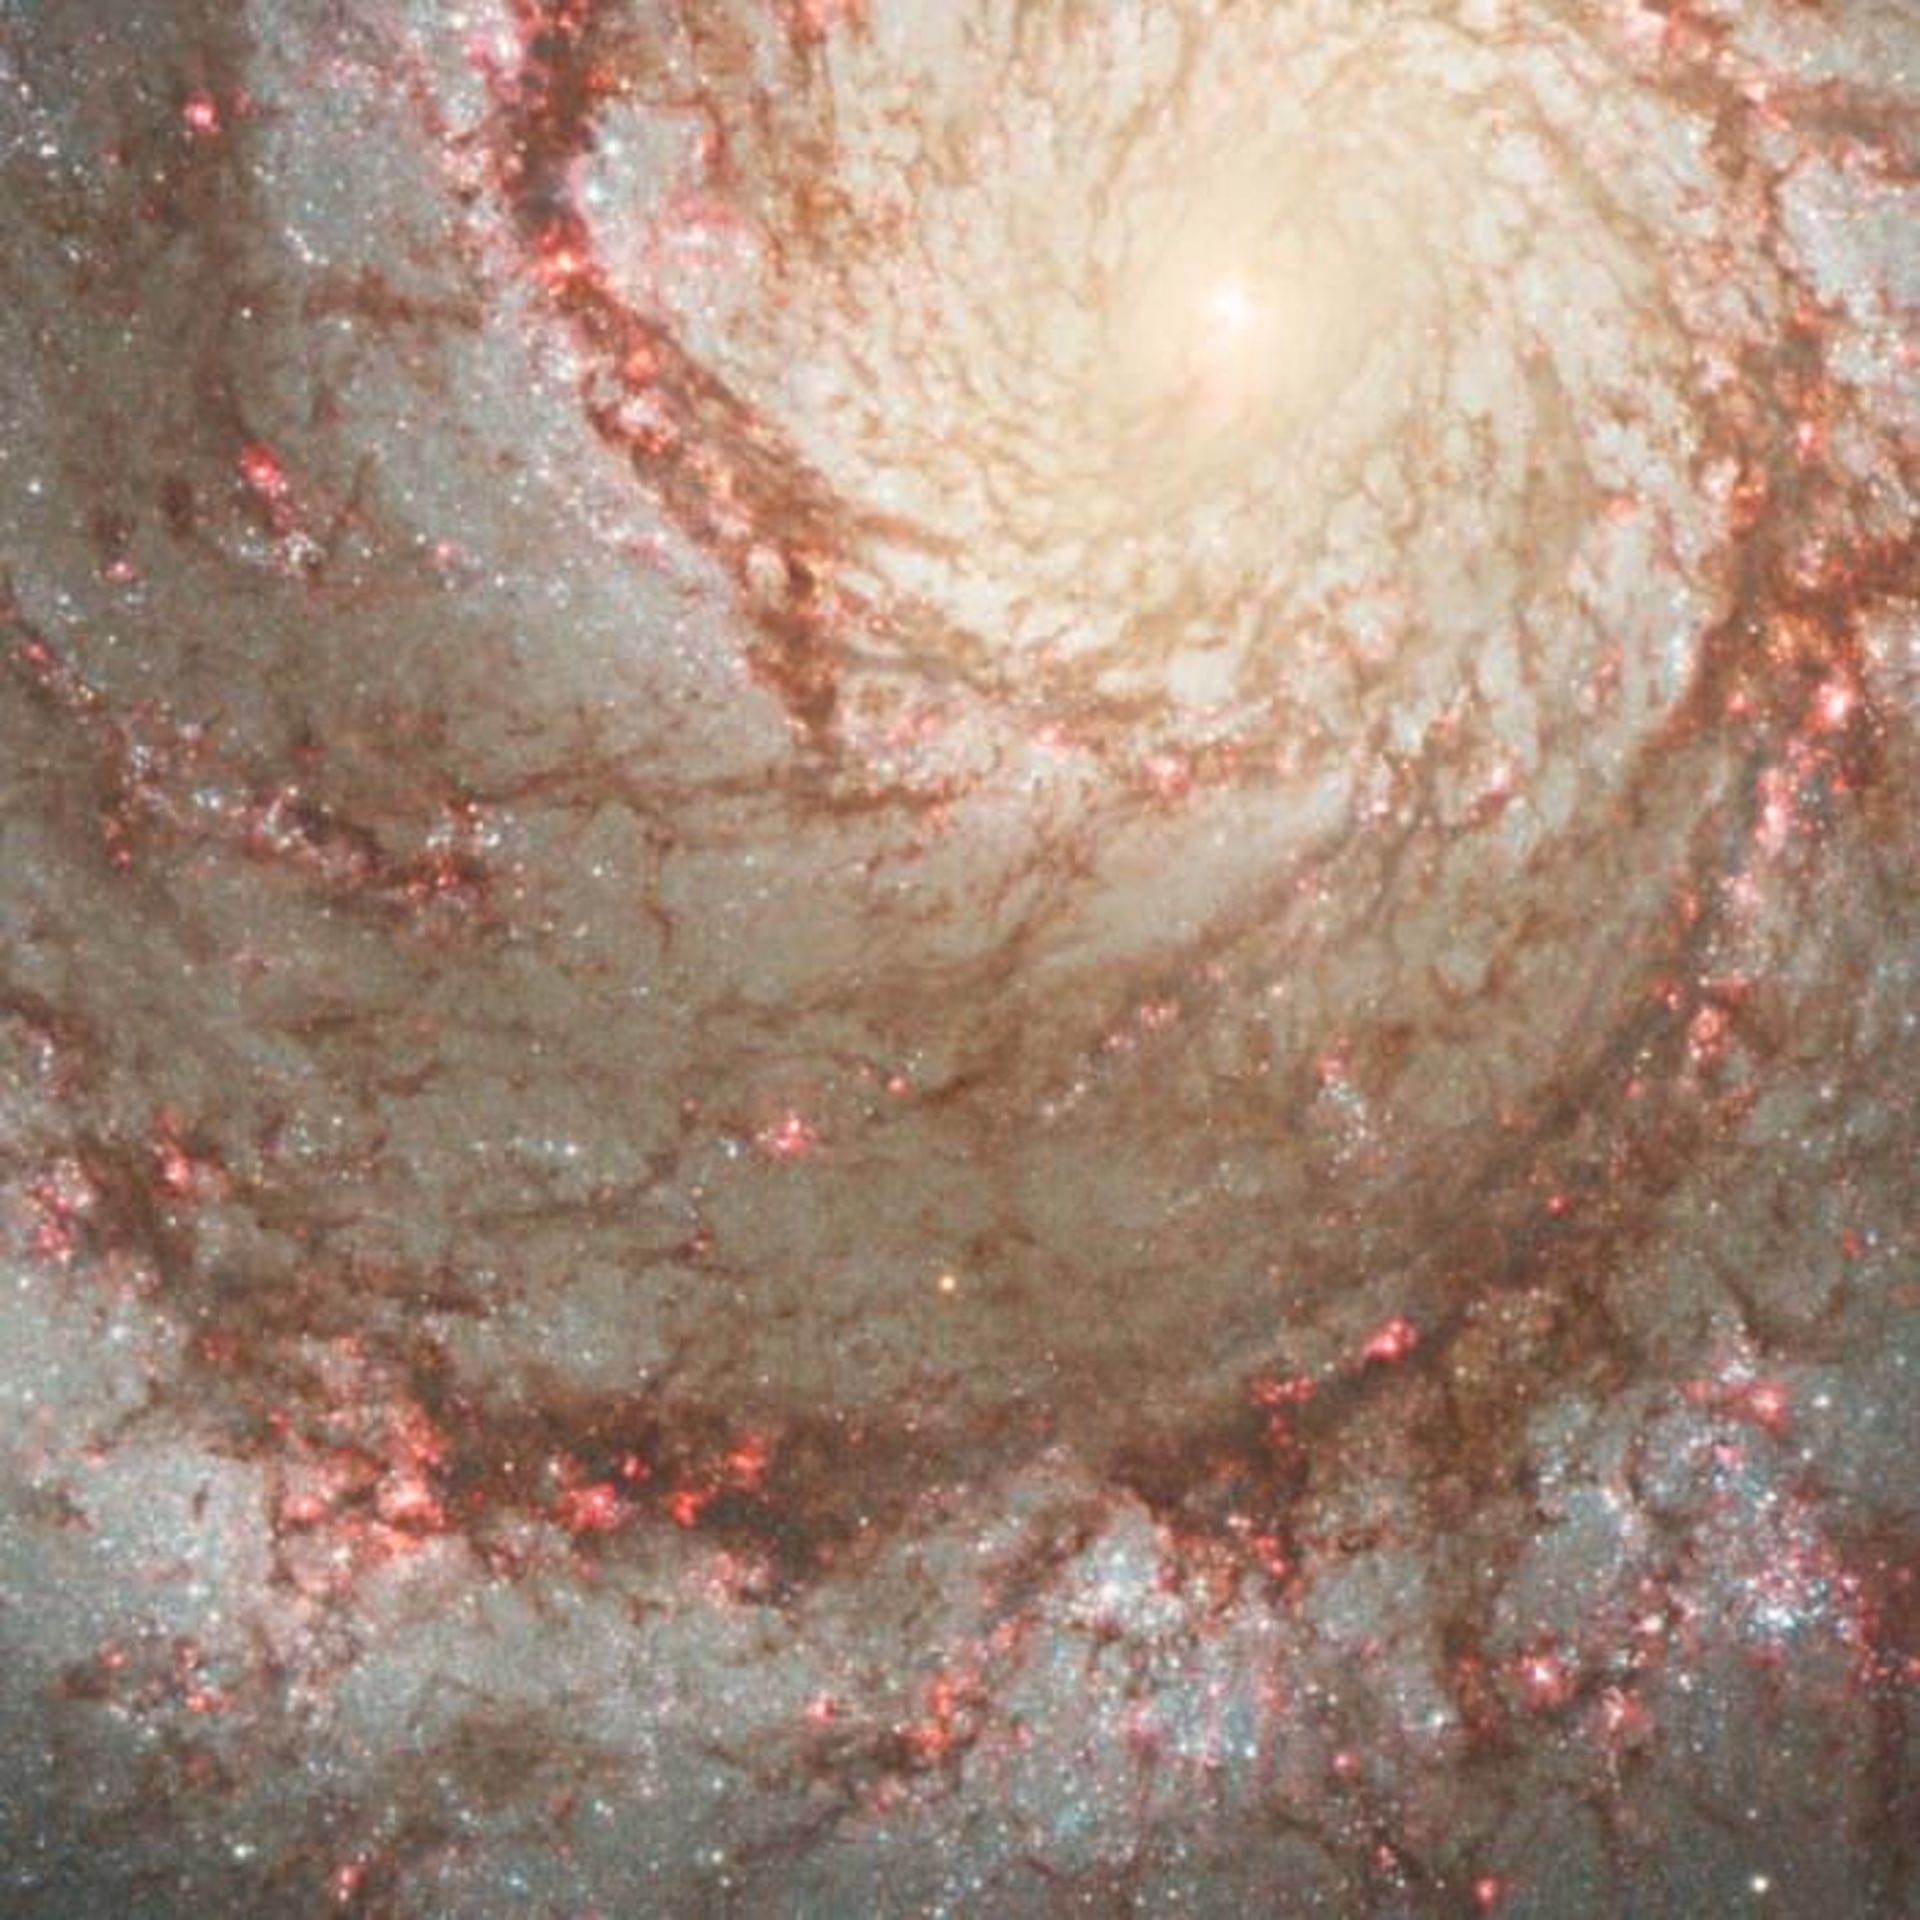 hubble-best-photos-progenitor-star-m51